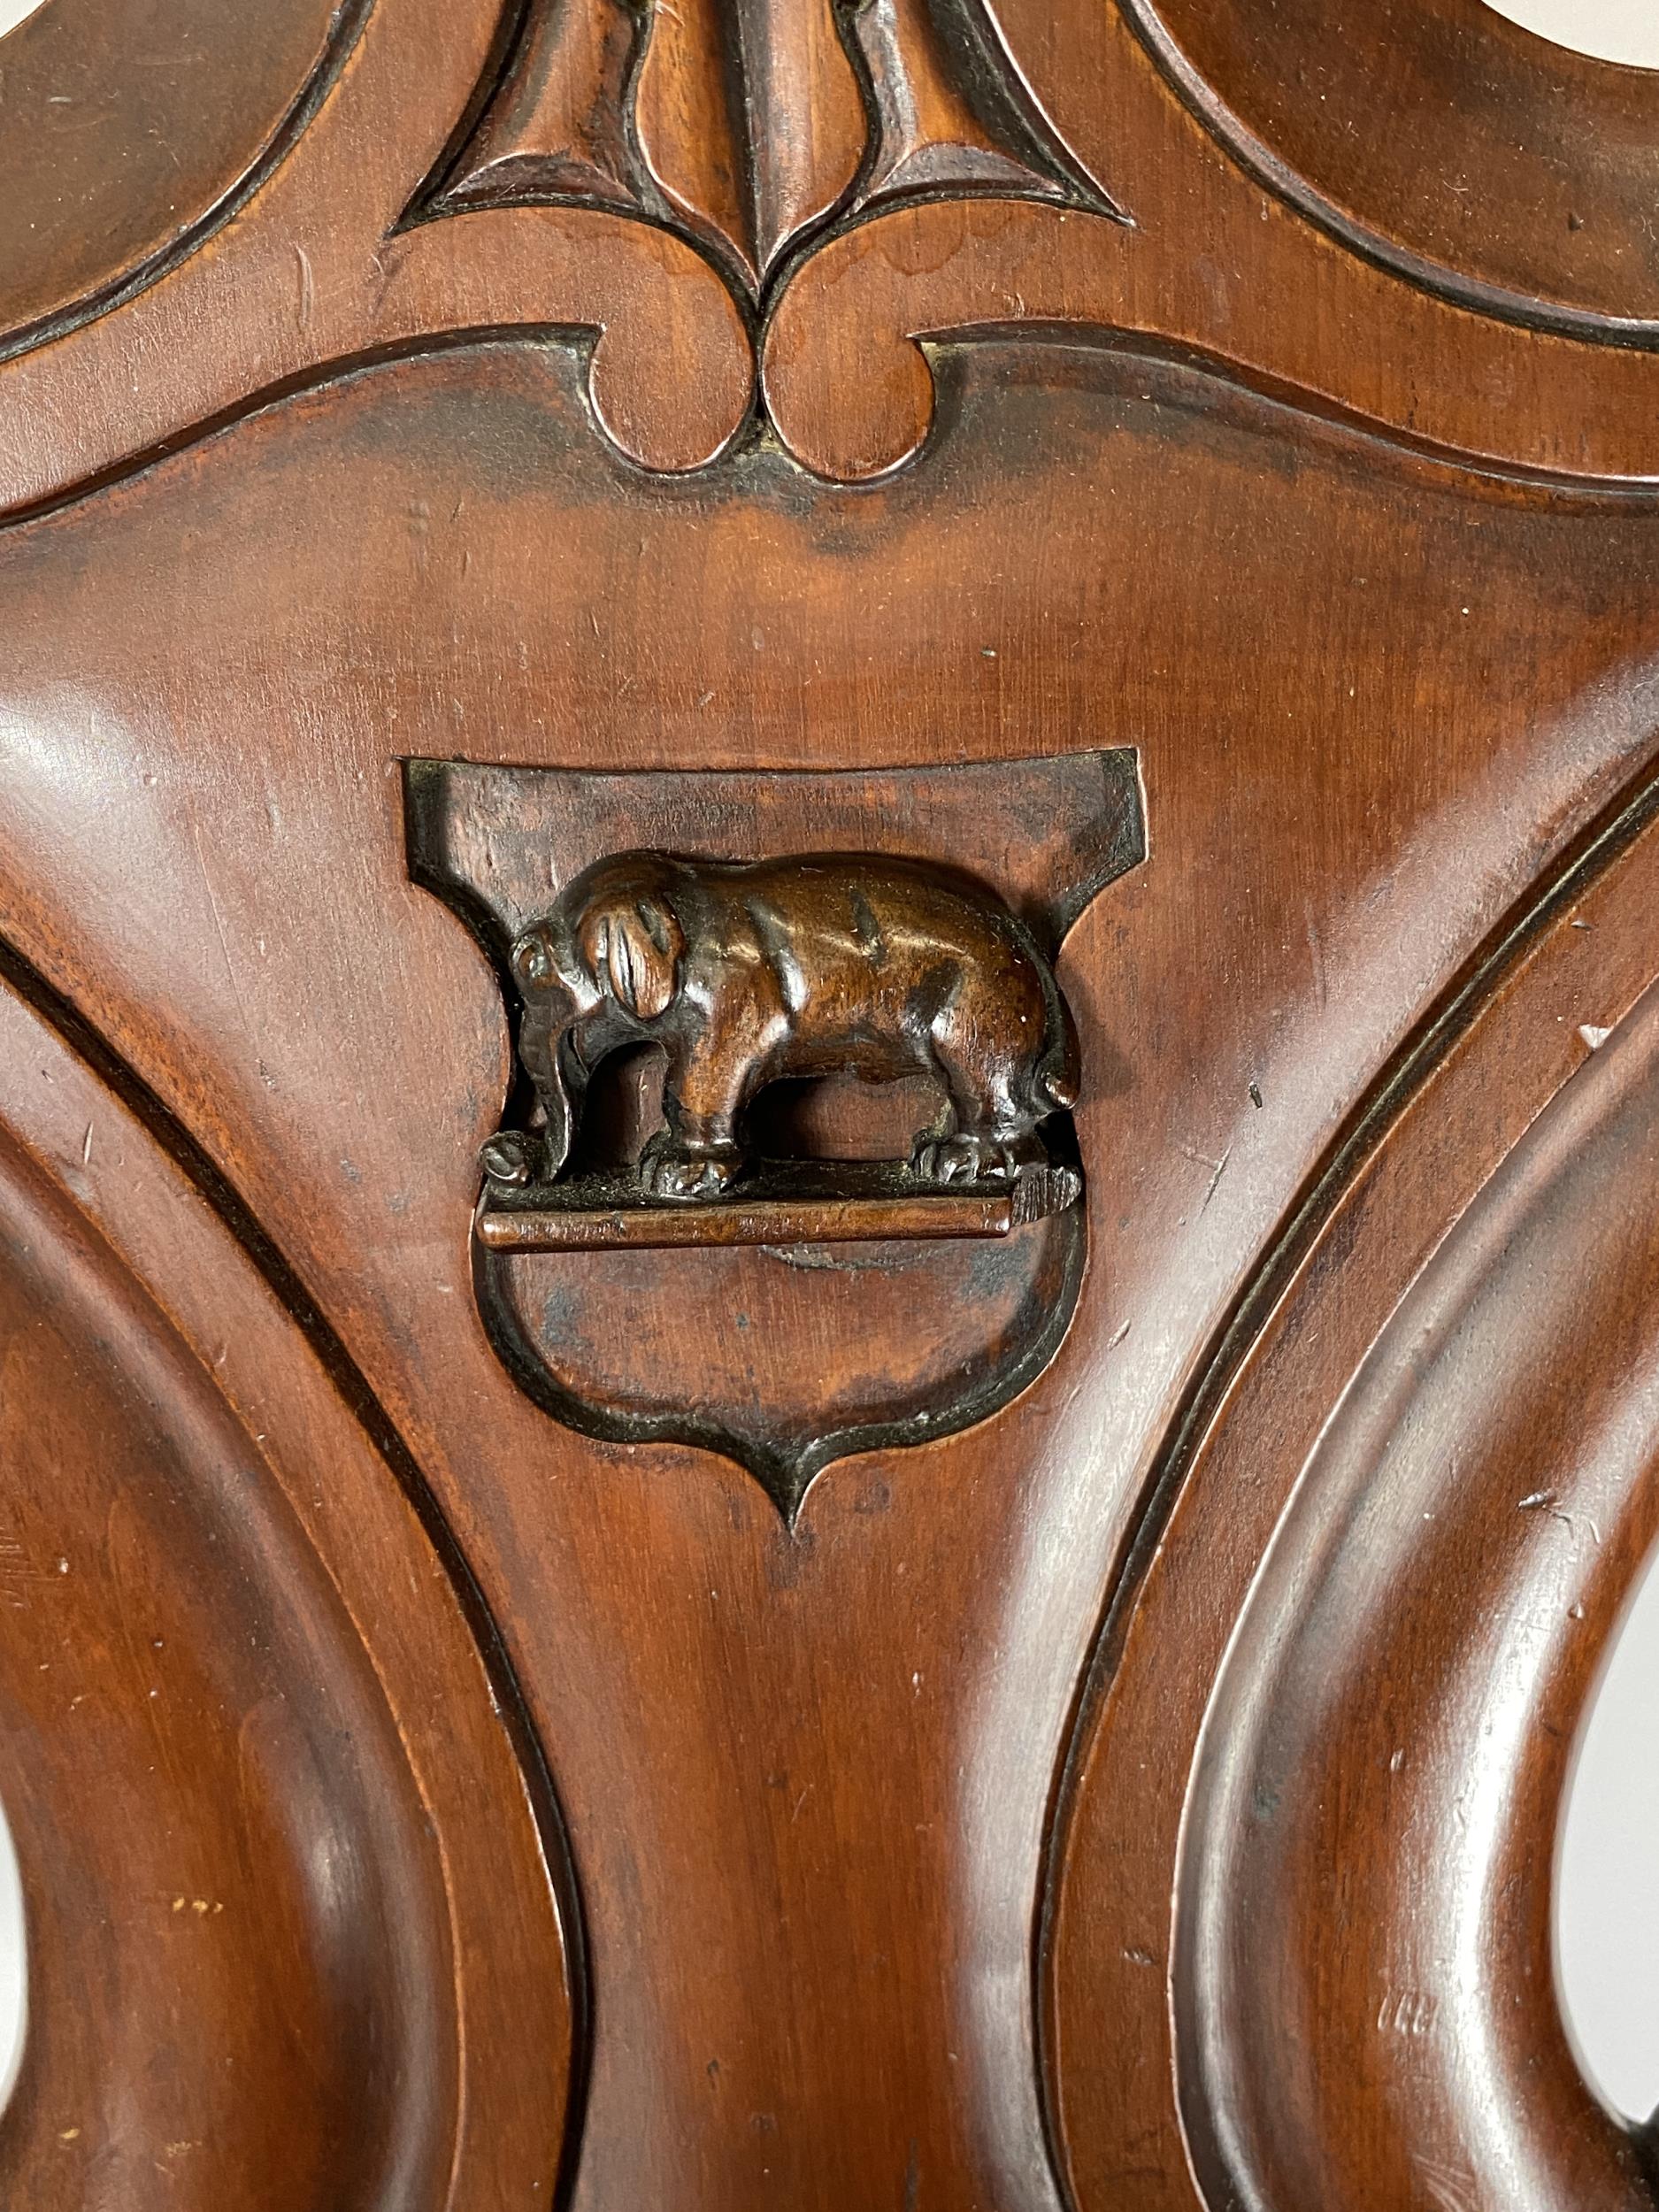 A 19TH CENTURY MAHOGANY CARVED BEDROOM CHAIR WITH ELEPHANT DESIGN BACK - Image 3 of 4